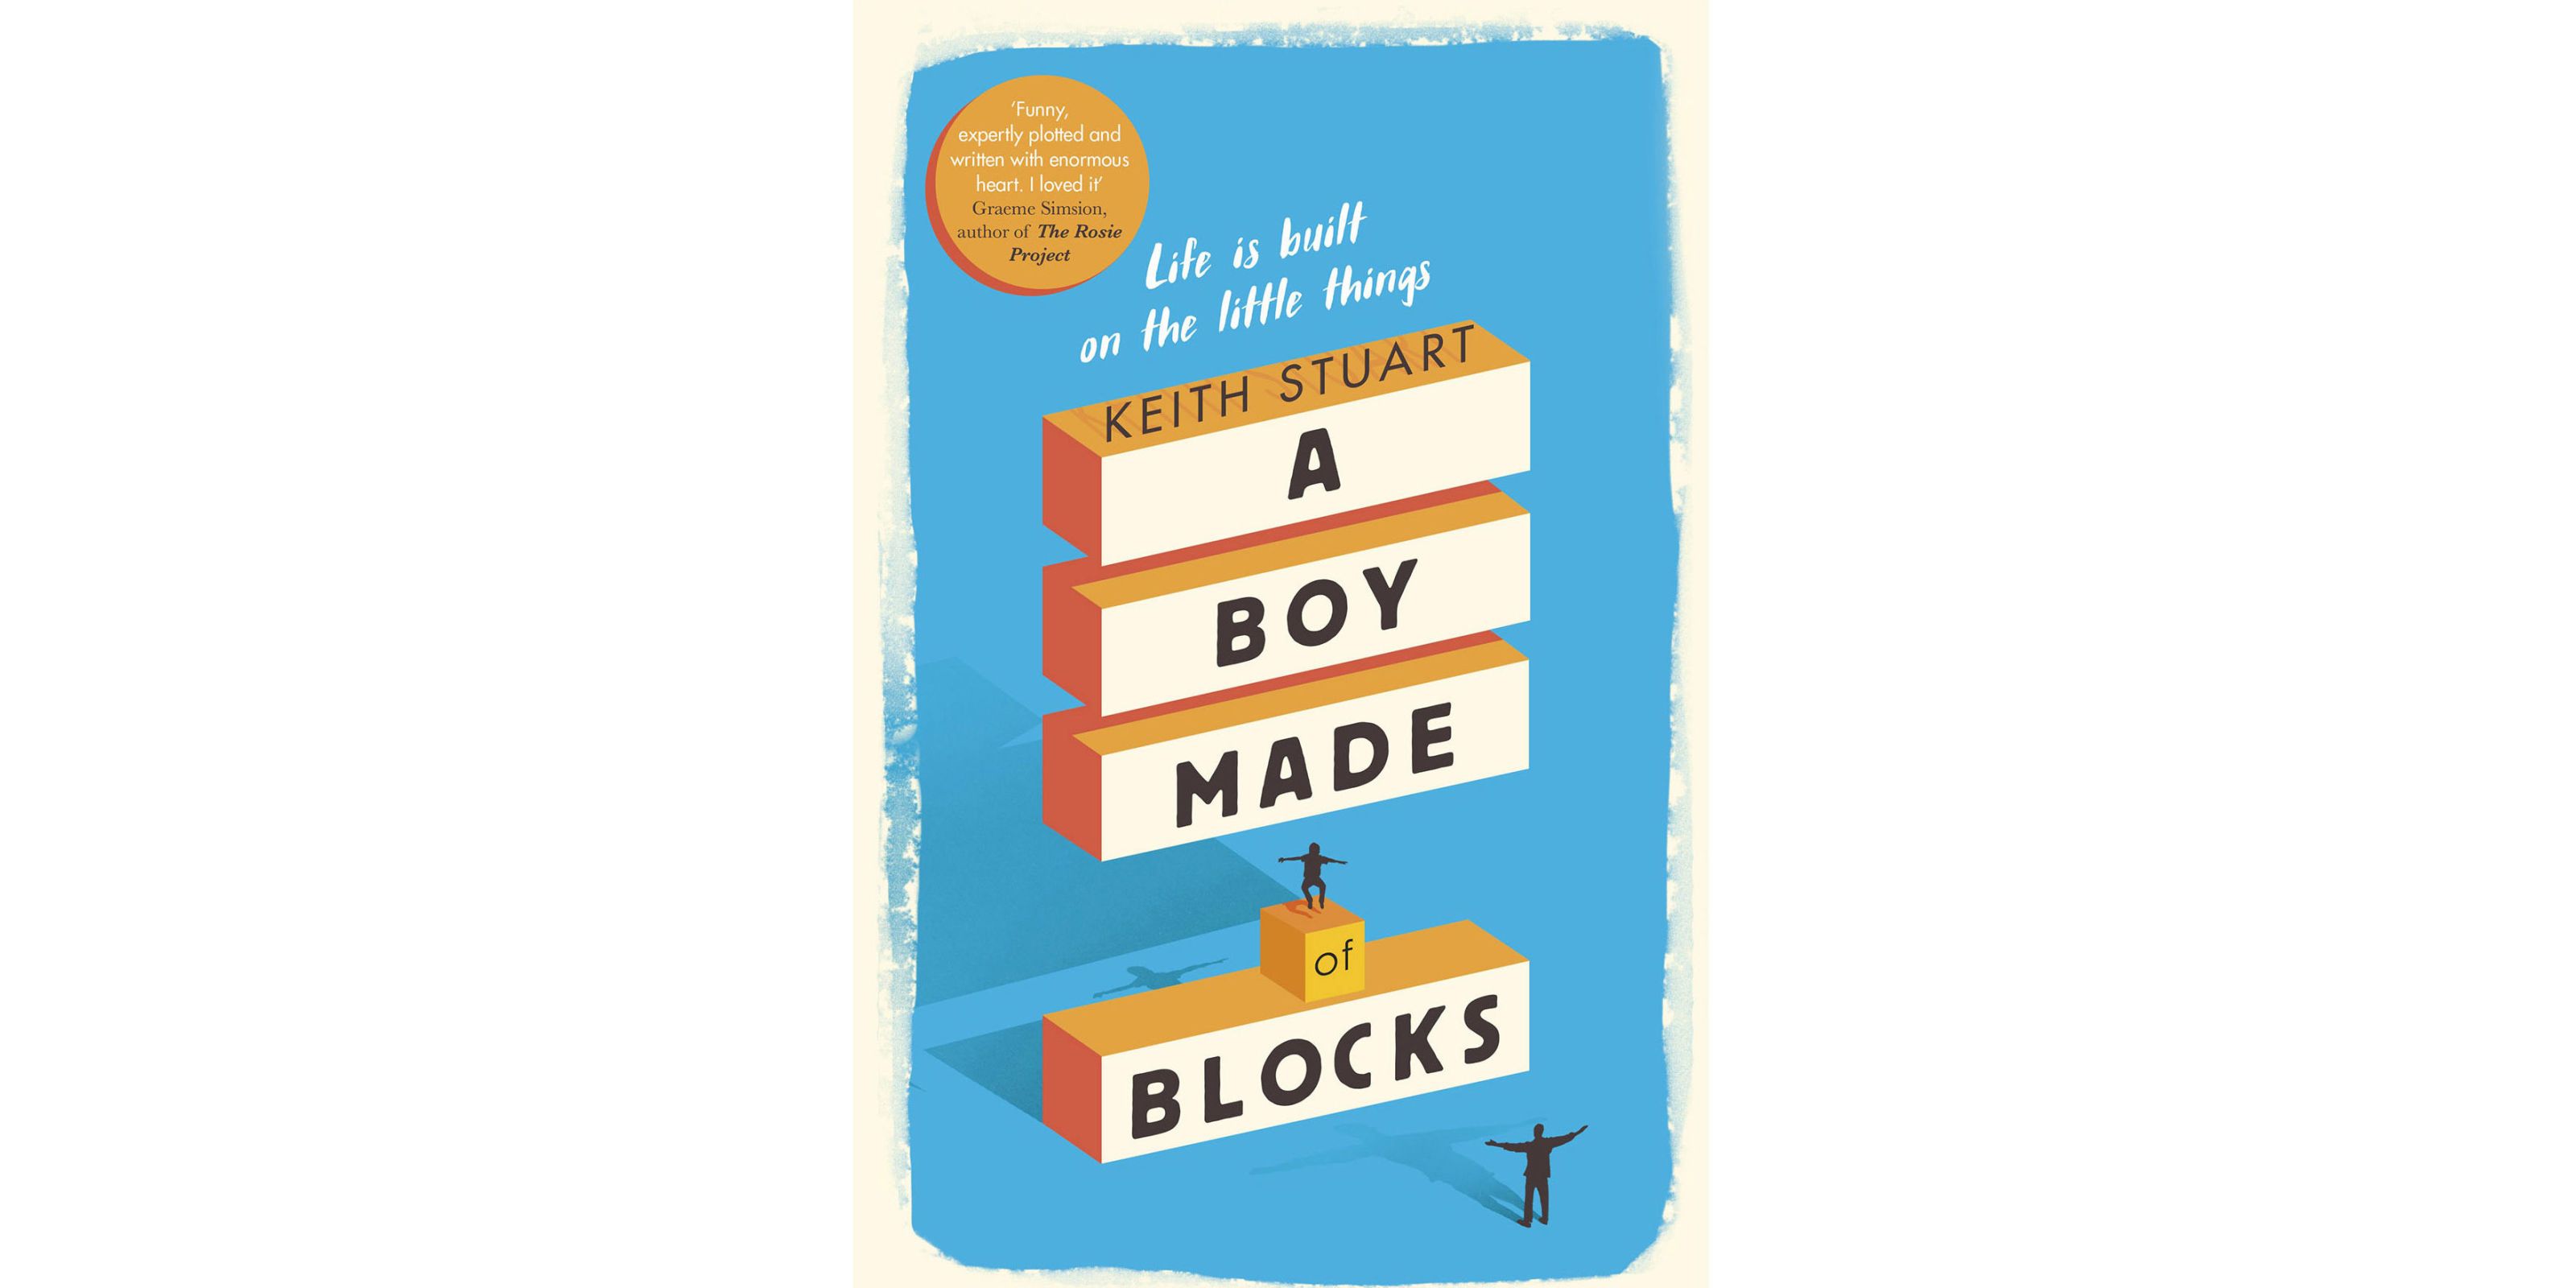 A Boy Made of Blocks by Keith Stuart